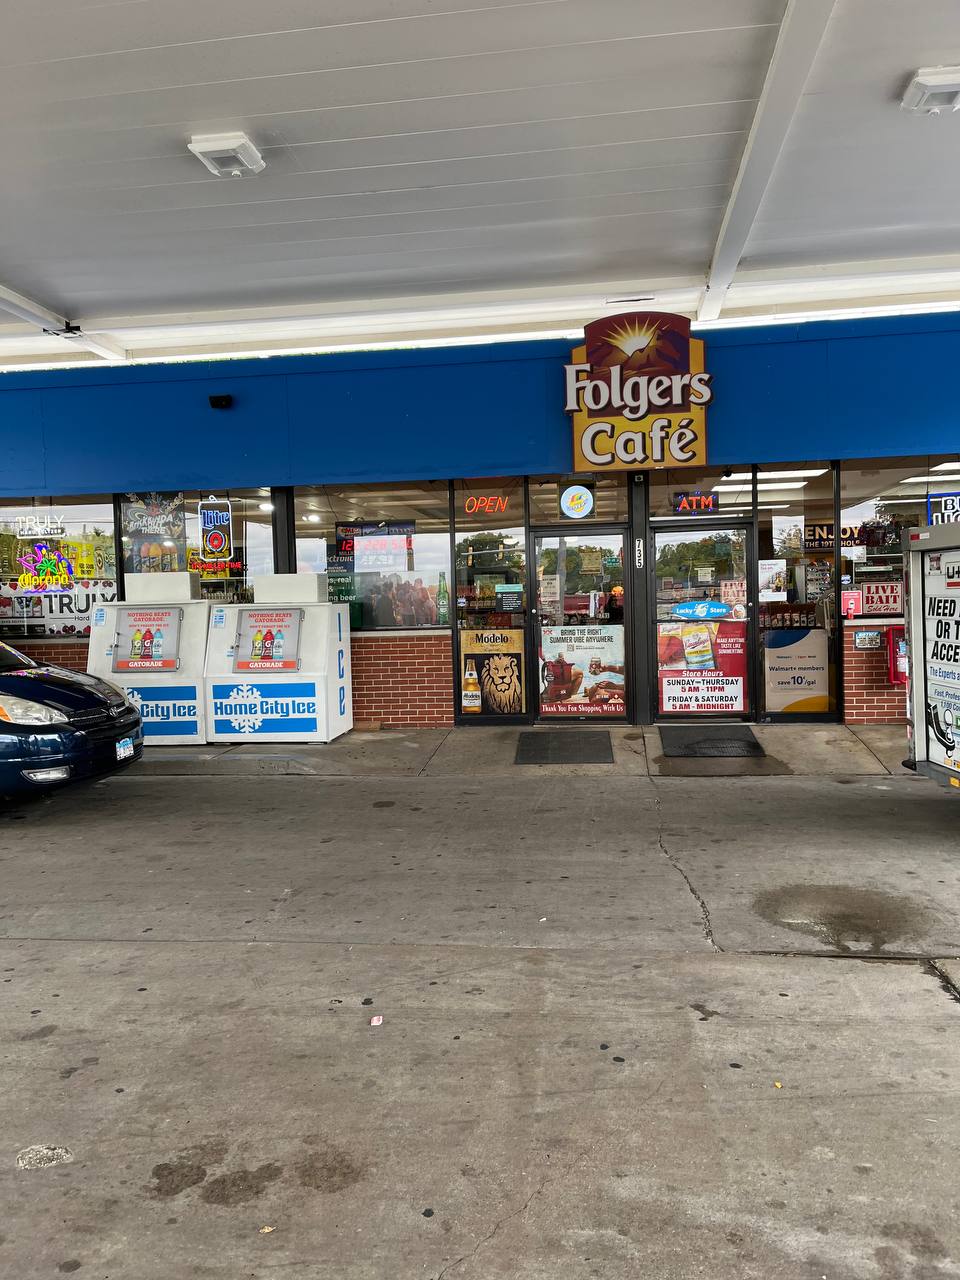 Getcoins - Bitcoin ATM - Inside of Exxon in Grayslake, Illinois